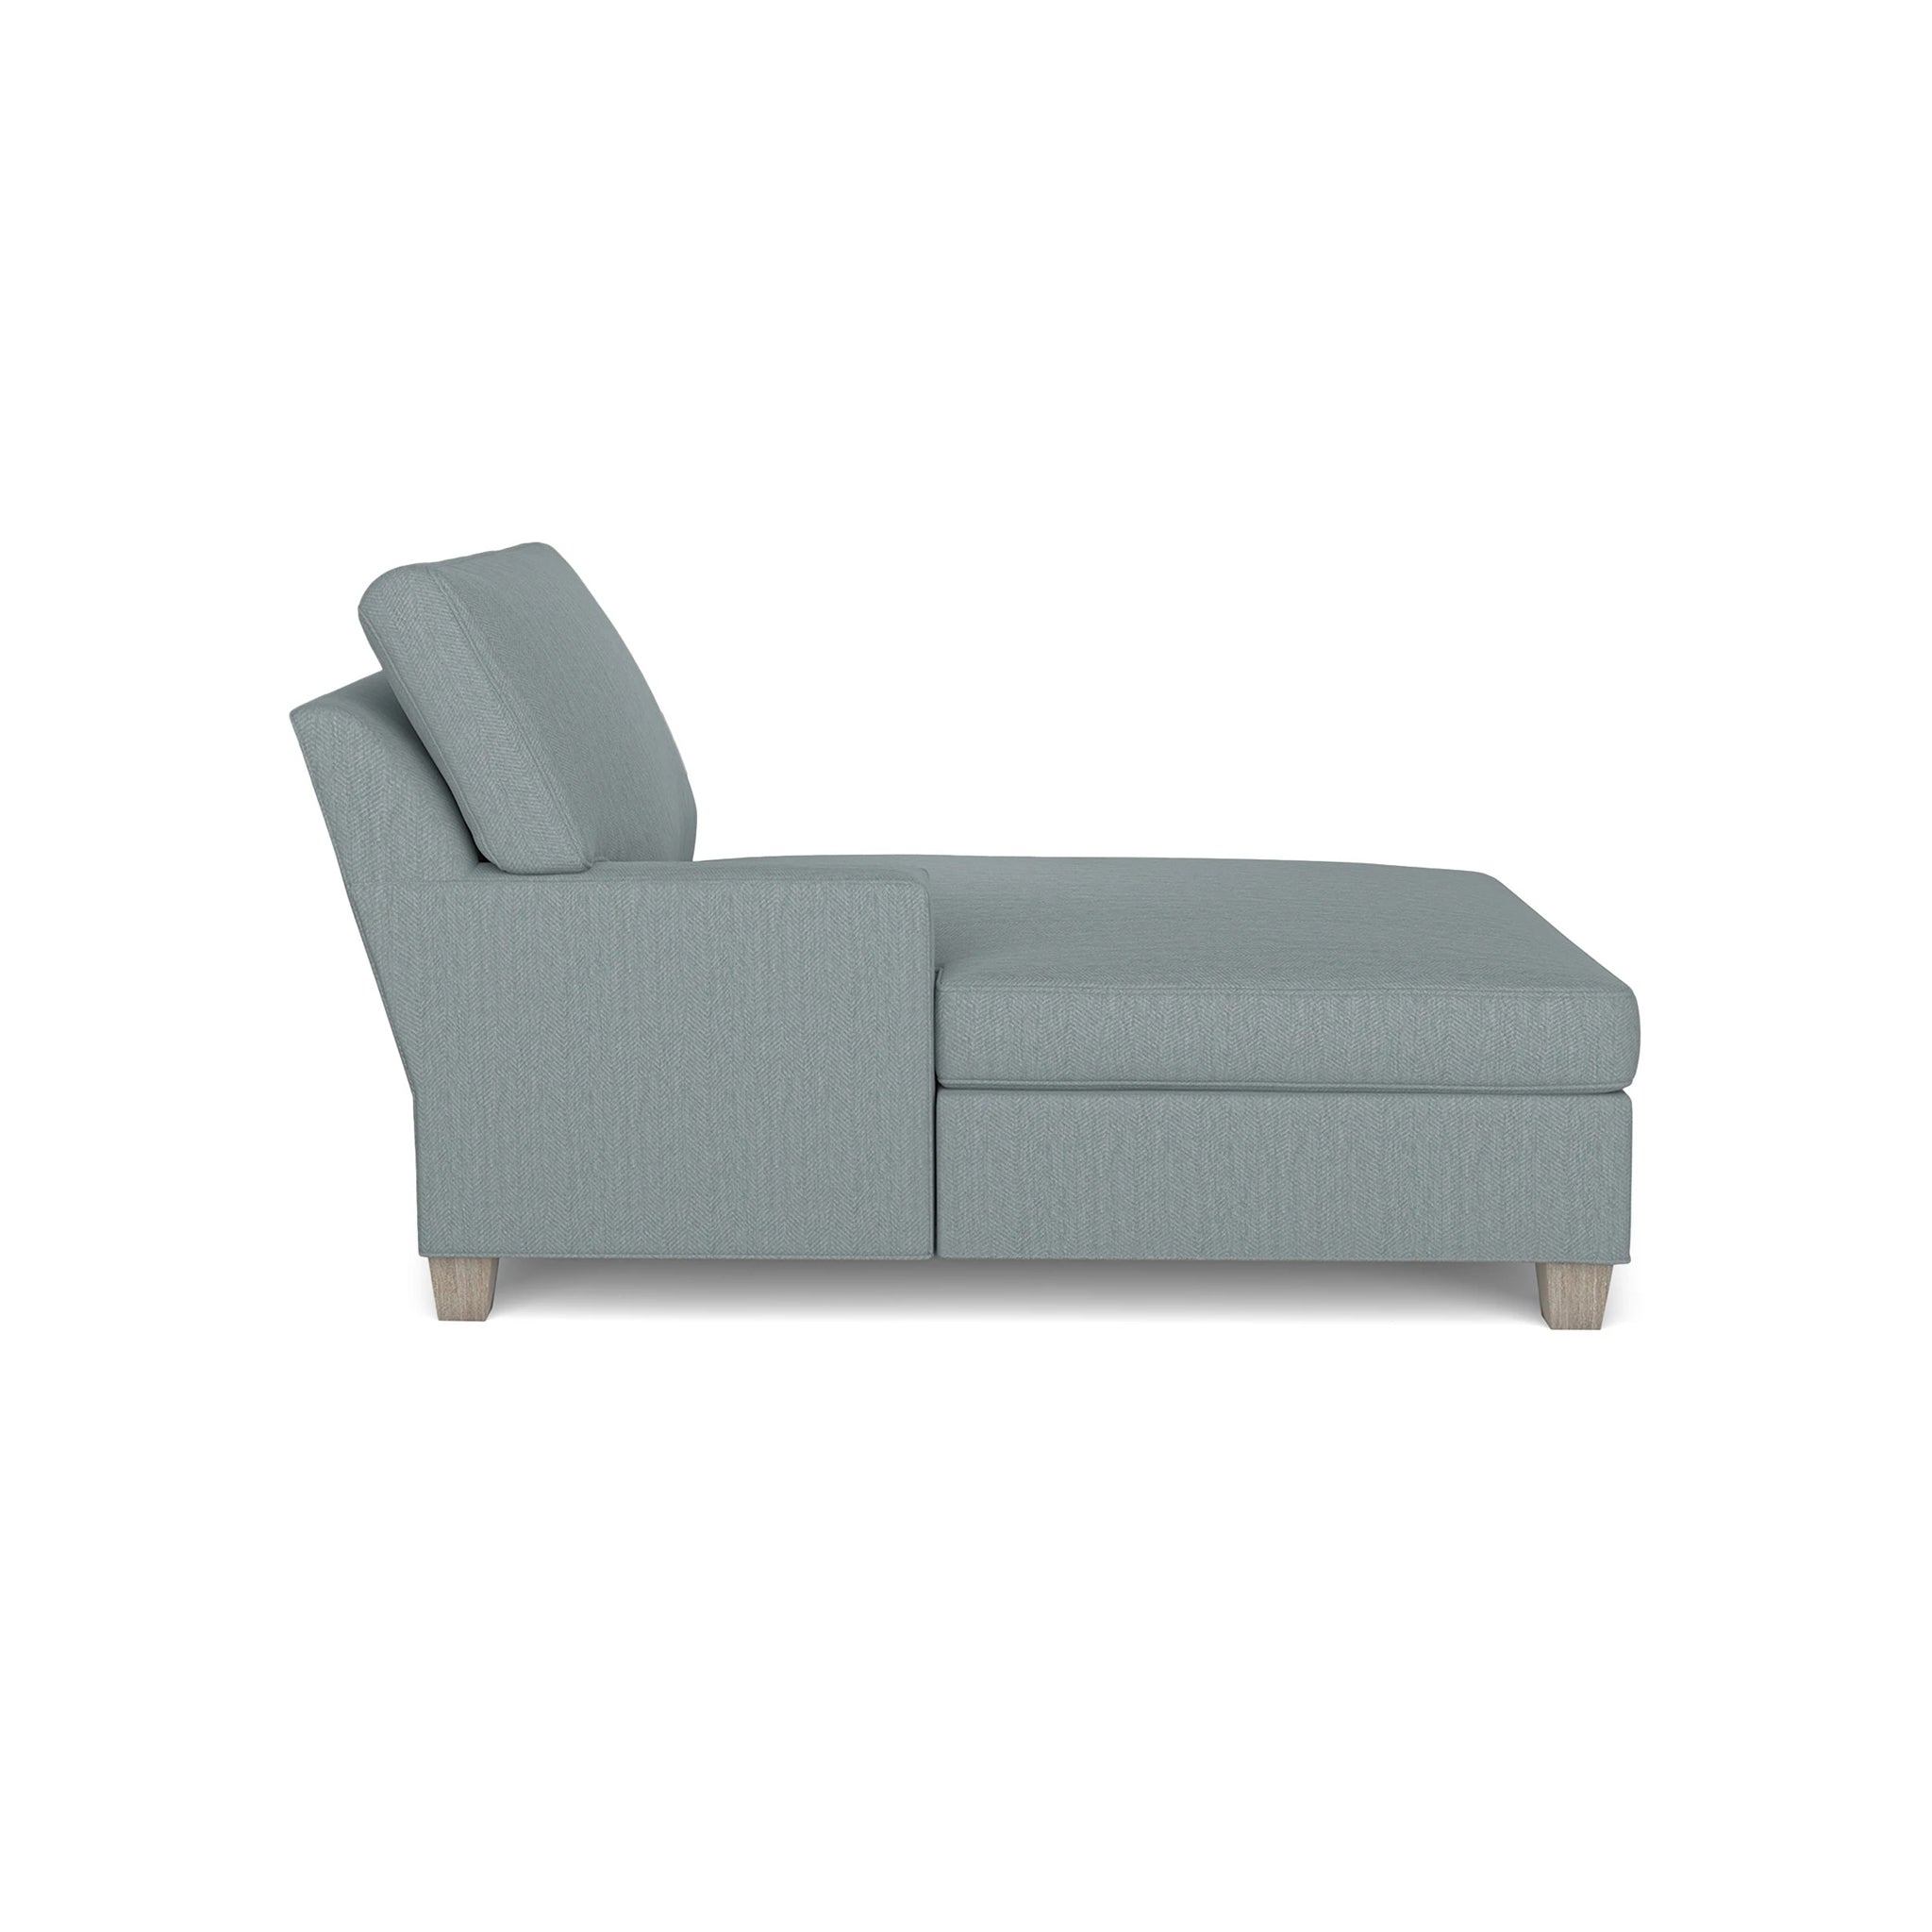 The Crag House Collection - LAF Chaise